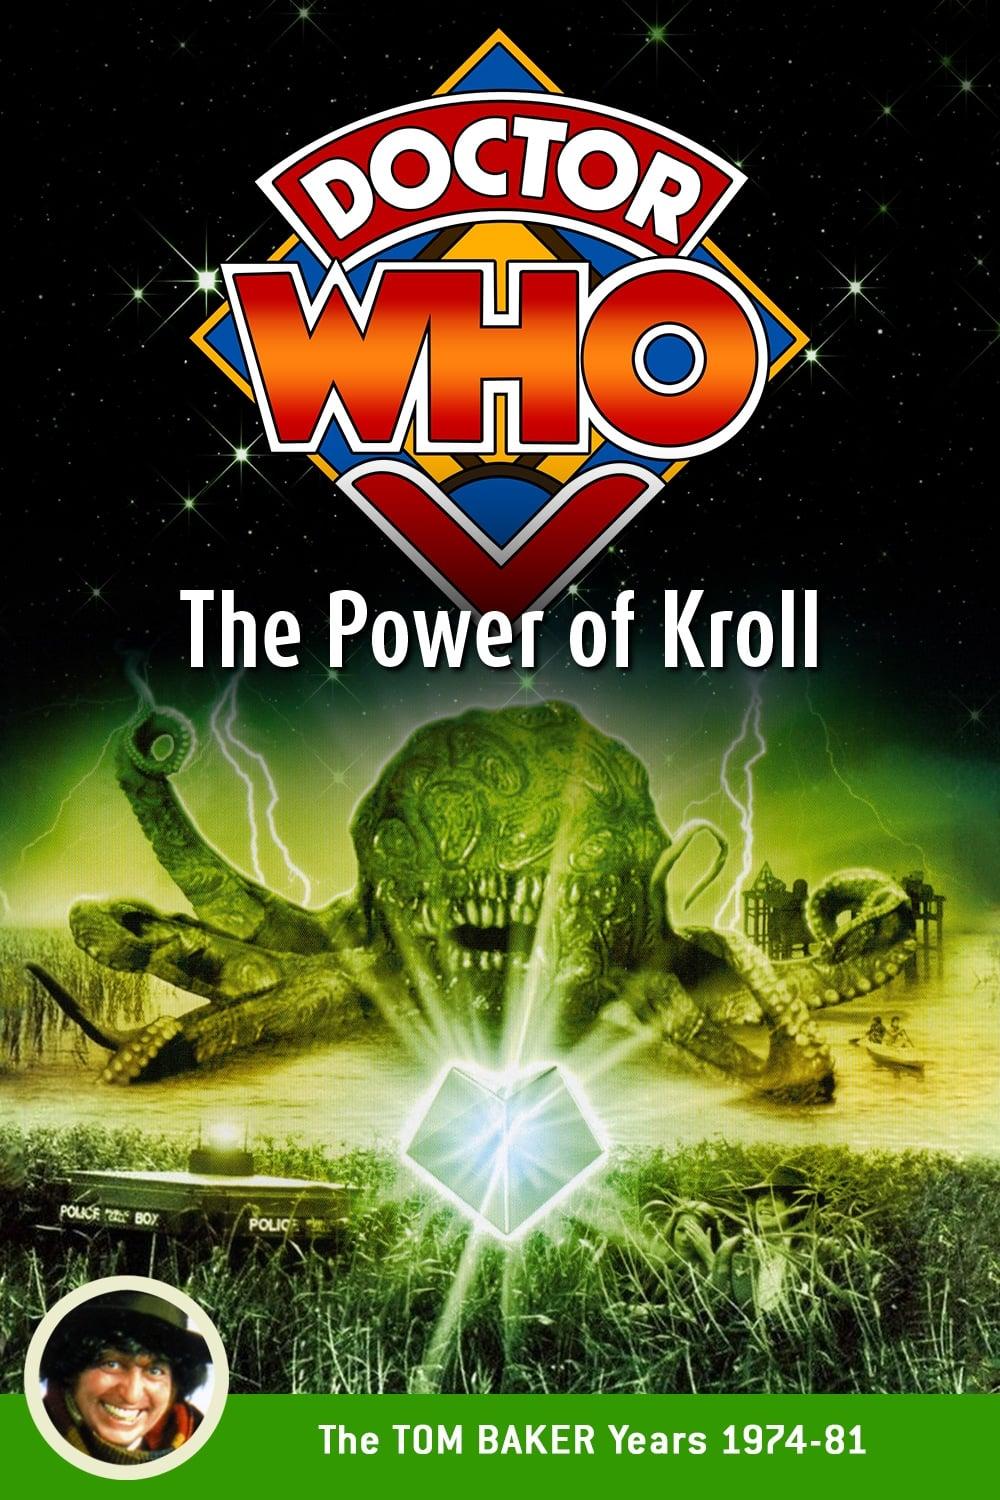 Doctor Who: The Power of Kroll poster